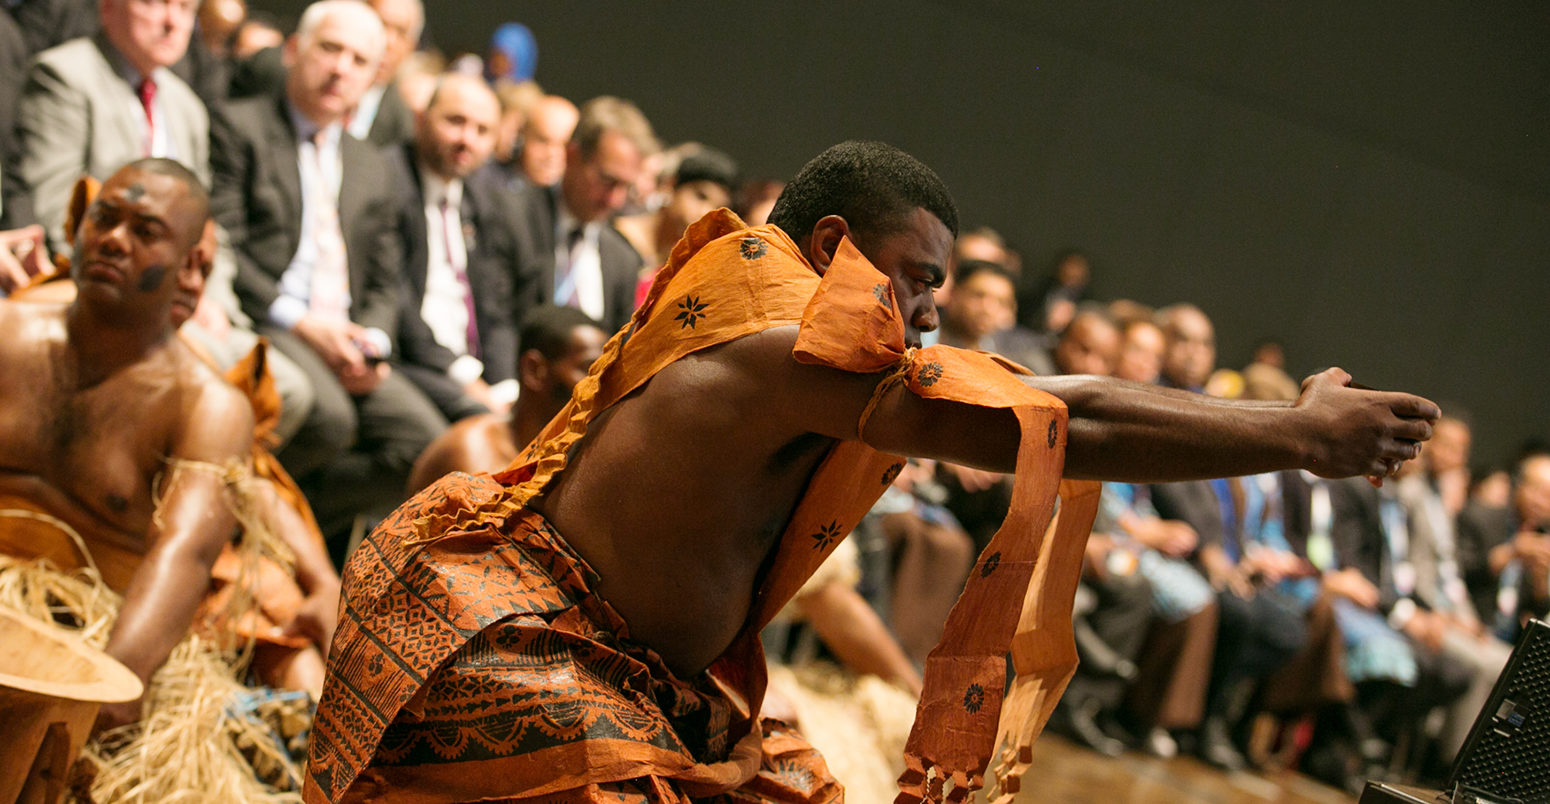 Representatives from Fiji perform a traditional ceremony, known as the Qaloqalovi, to open the meeting.